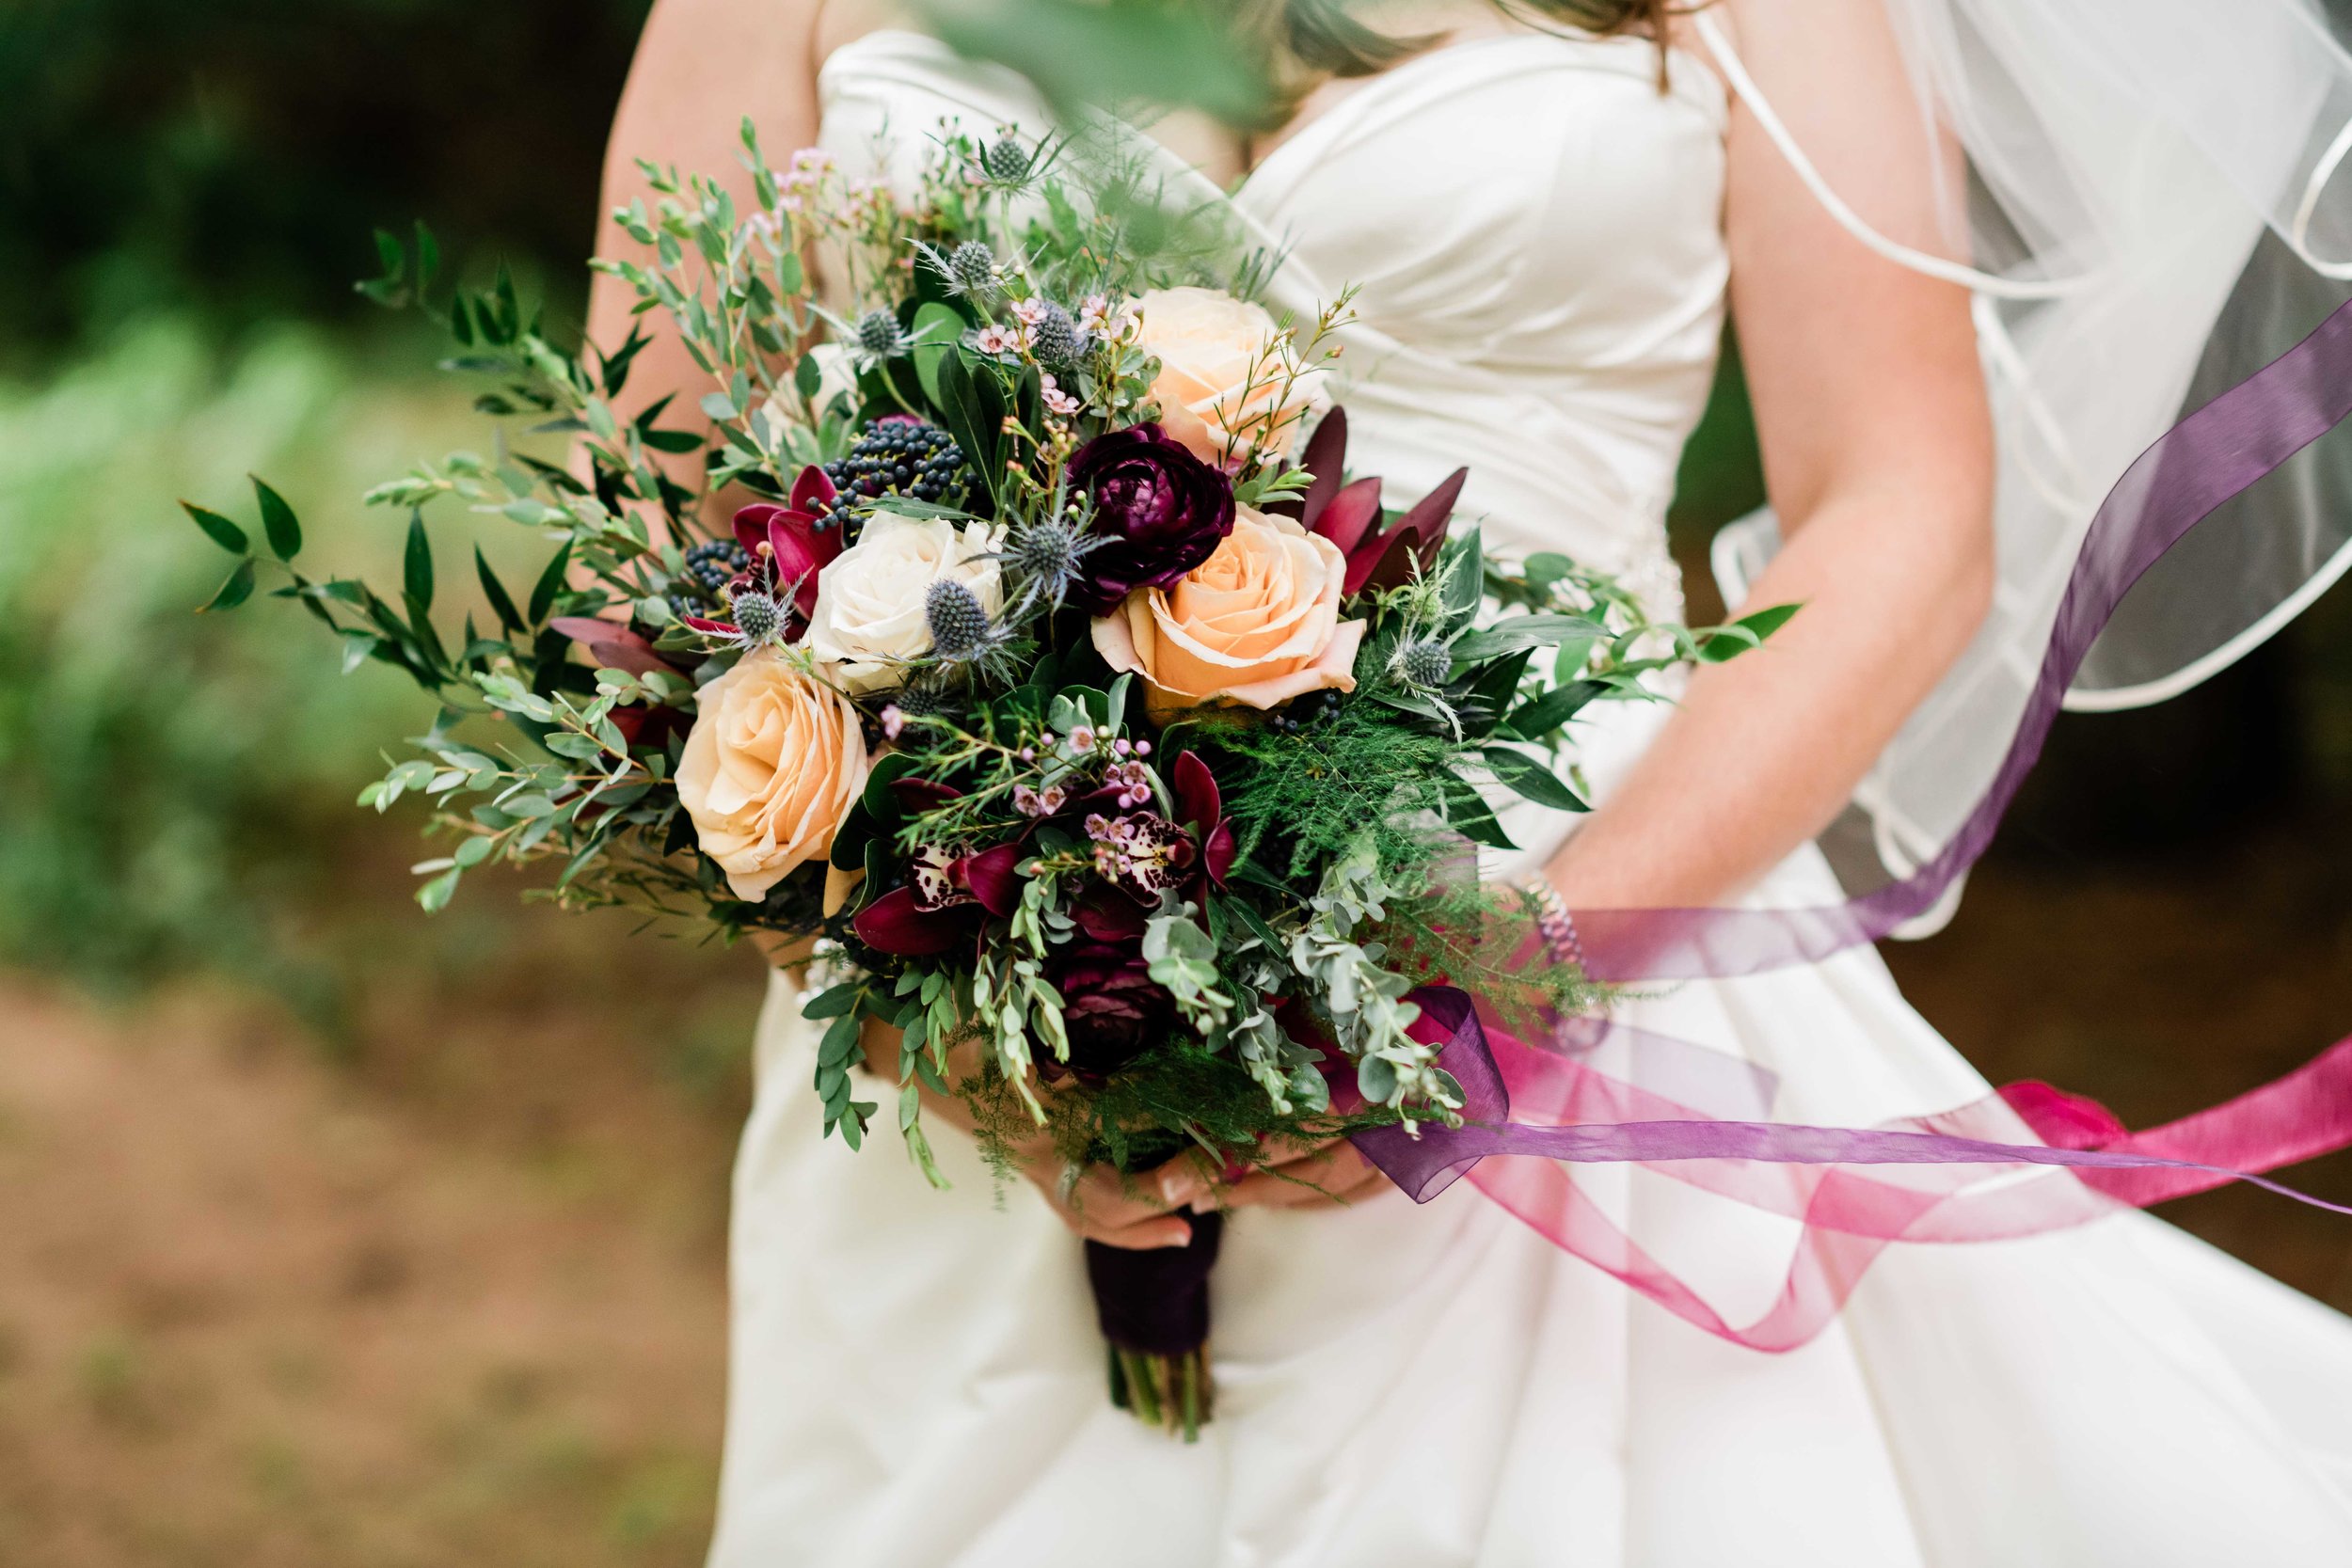 Bride's veil blows in the wind as she holds her bouquet